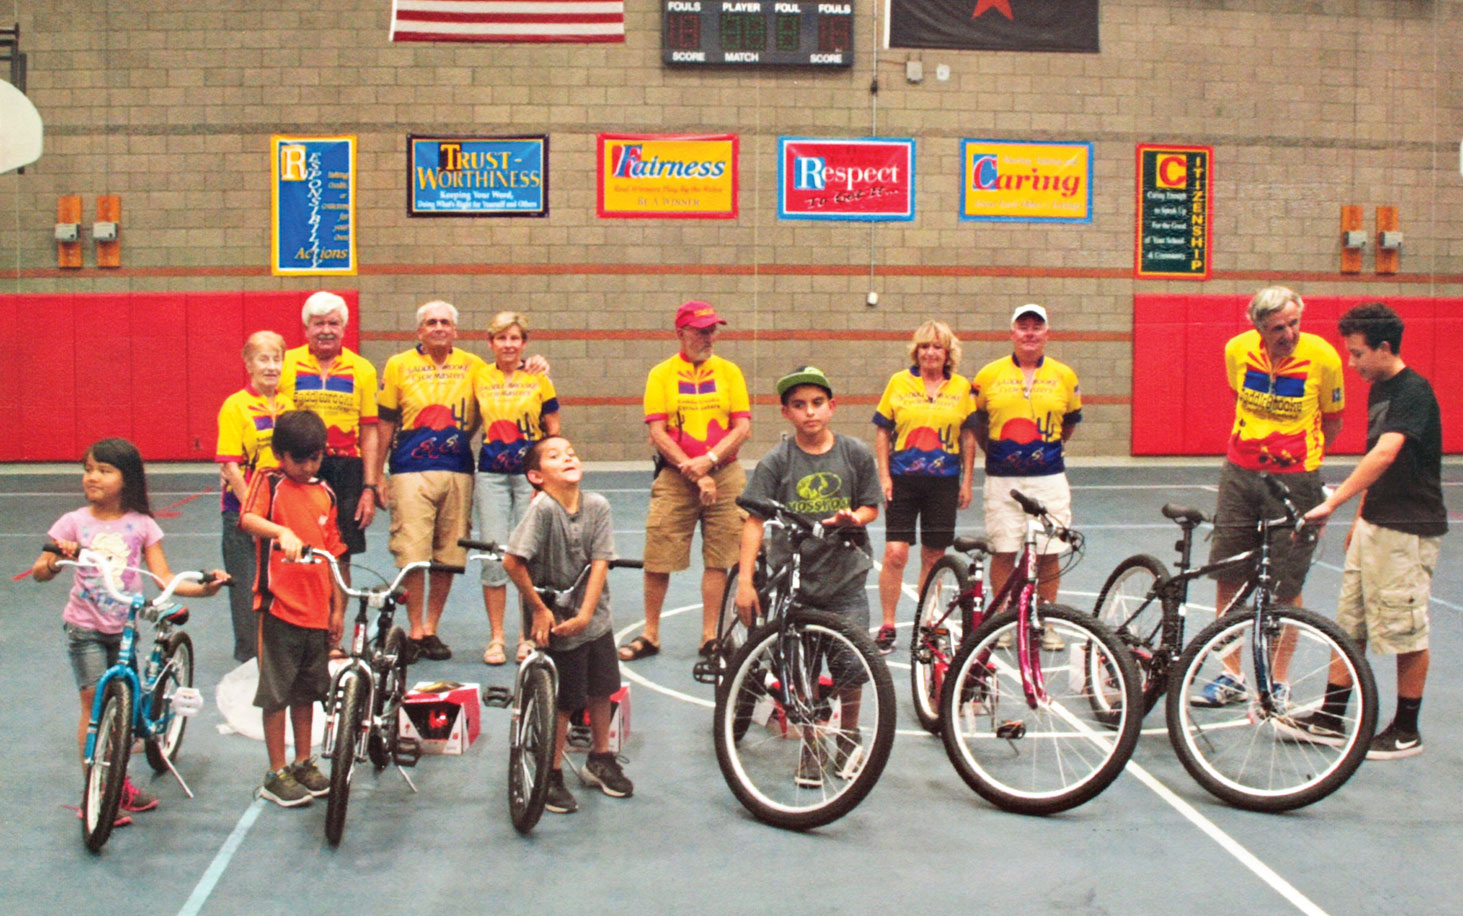 The CycleMasters enjoyed presenting bicycles to these deserving students.